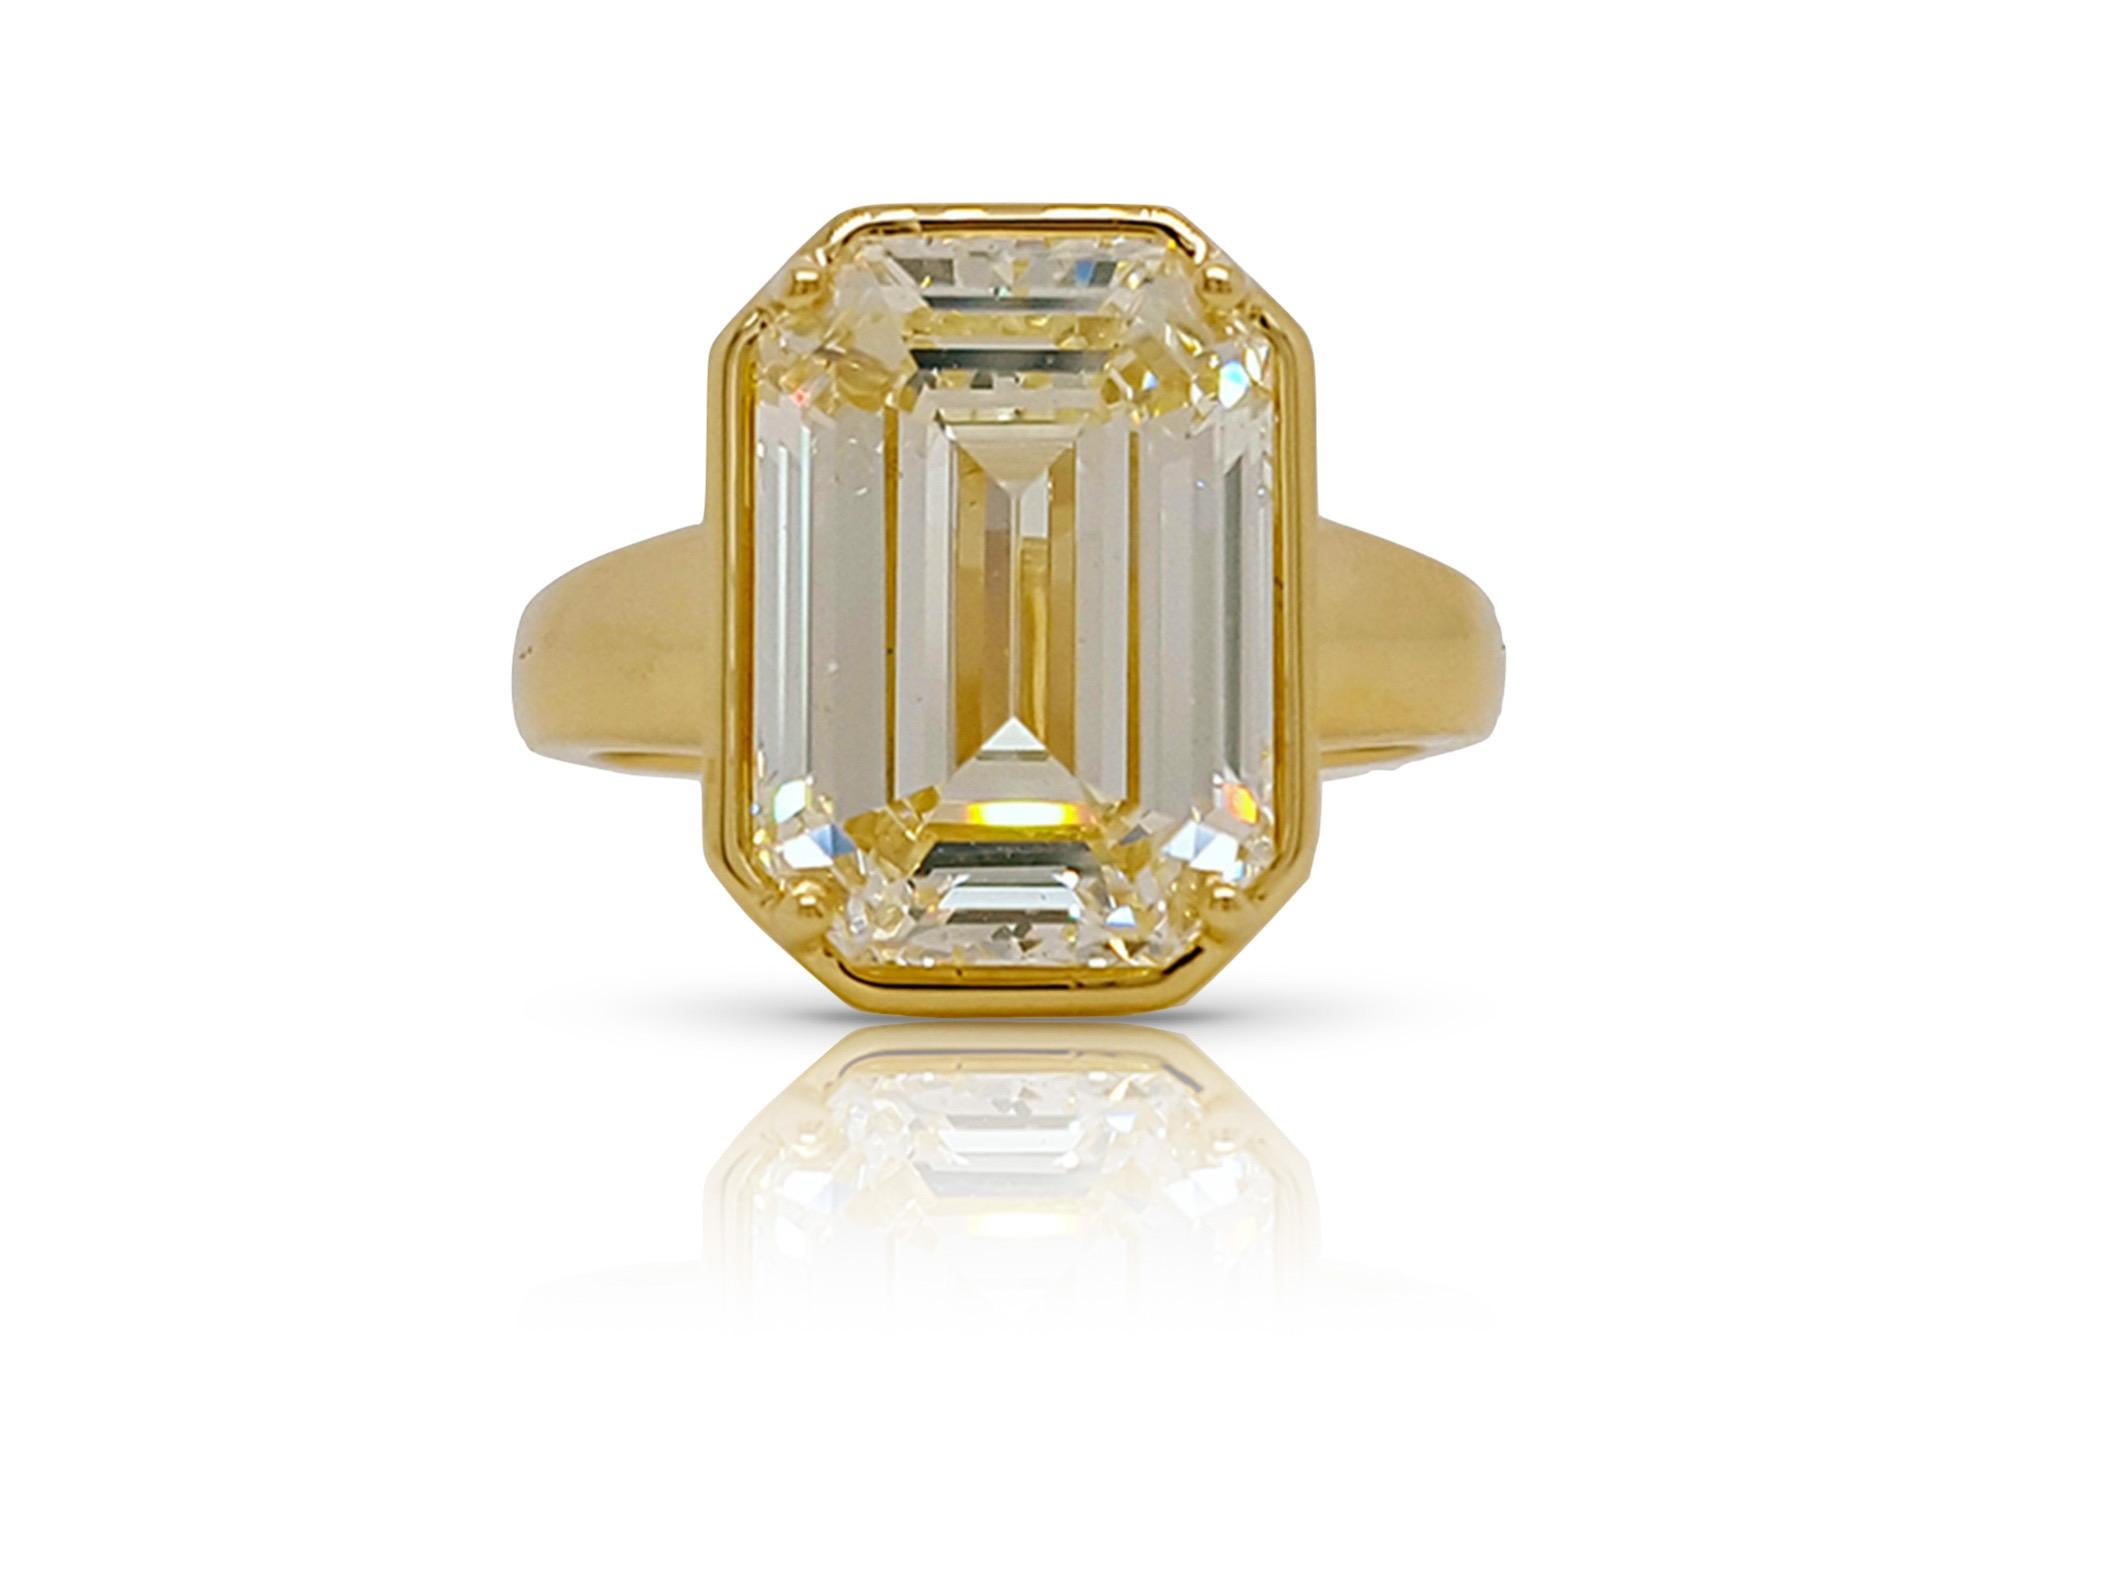 Absolutely stunning engagement ring style showcasing a 7.50 Carat Emerald Cut Diamond Set in 18K Gold Bezel Engagement Ring certified by GIA as VS2 clarity, O-P color. The handcrafted bezel setting add a beautiful yellowish tone. The diamond is  set